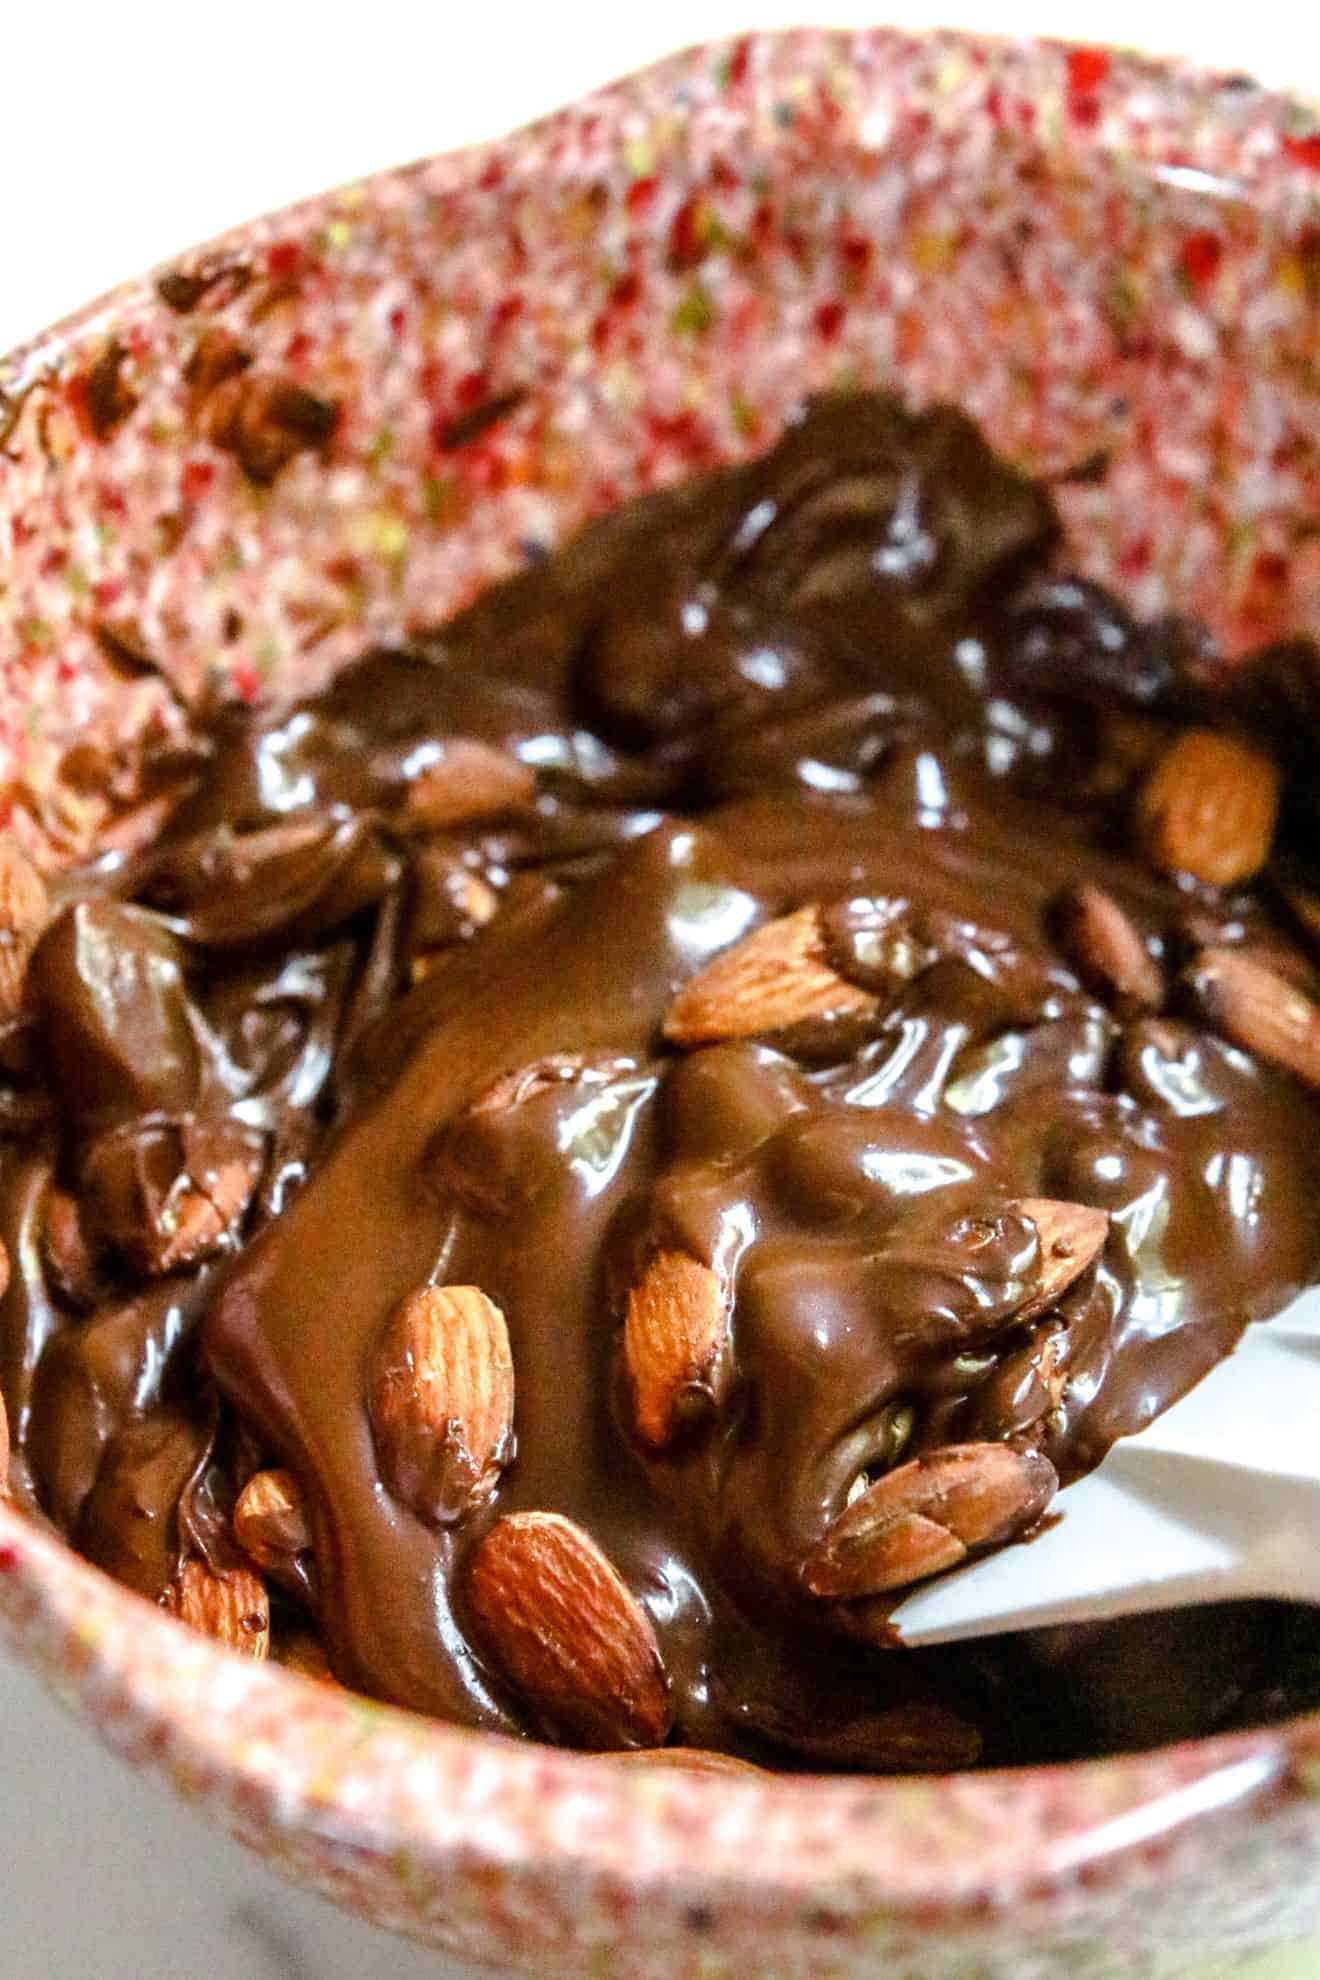 This is a side view of melted chocolate folded with almonds. The melted chocolate is in a pink speckled mixed bowl sitting on a white marble counter.